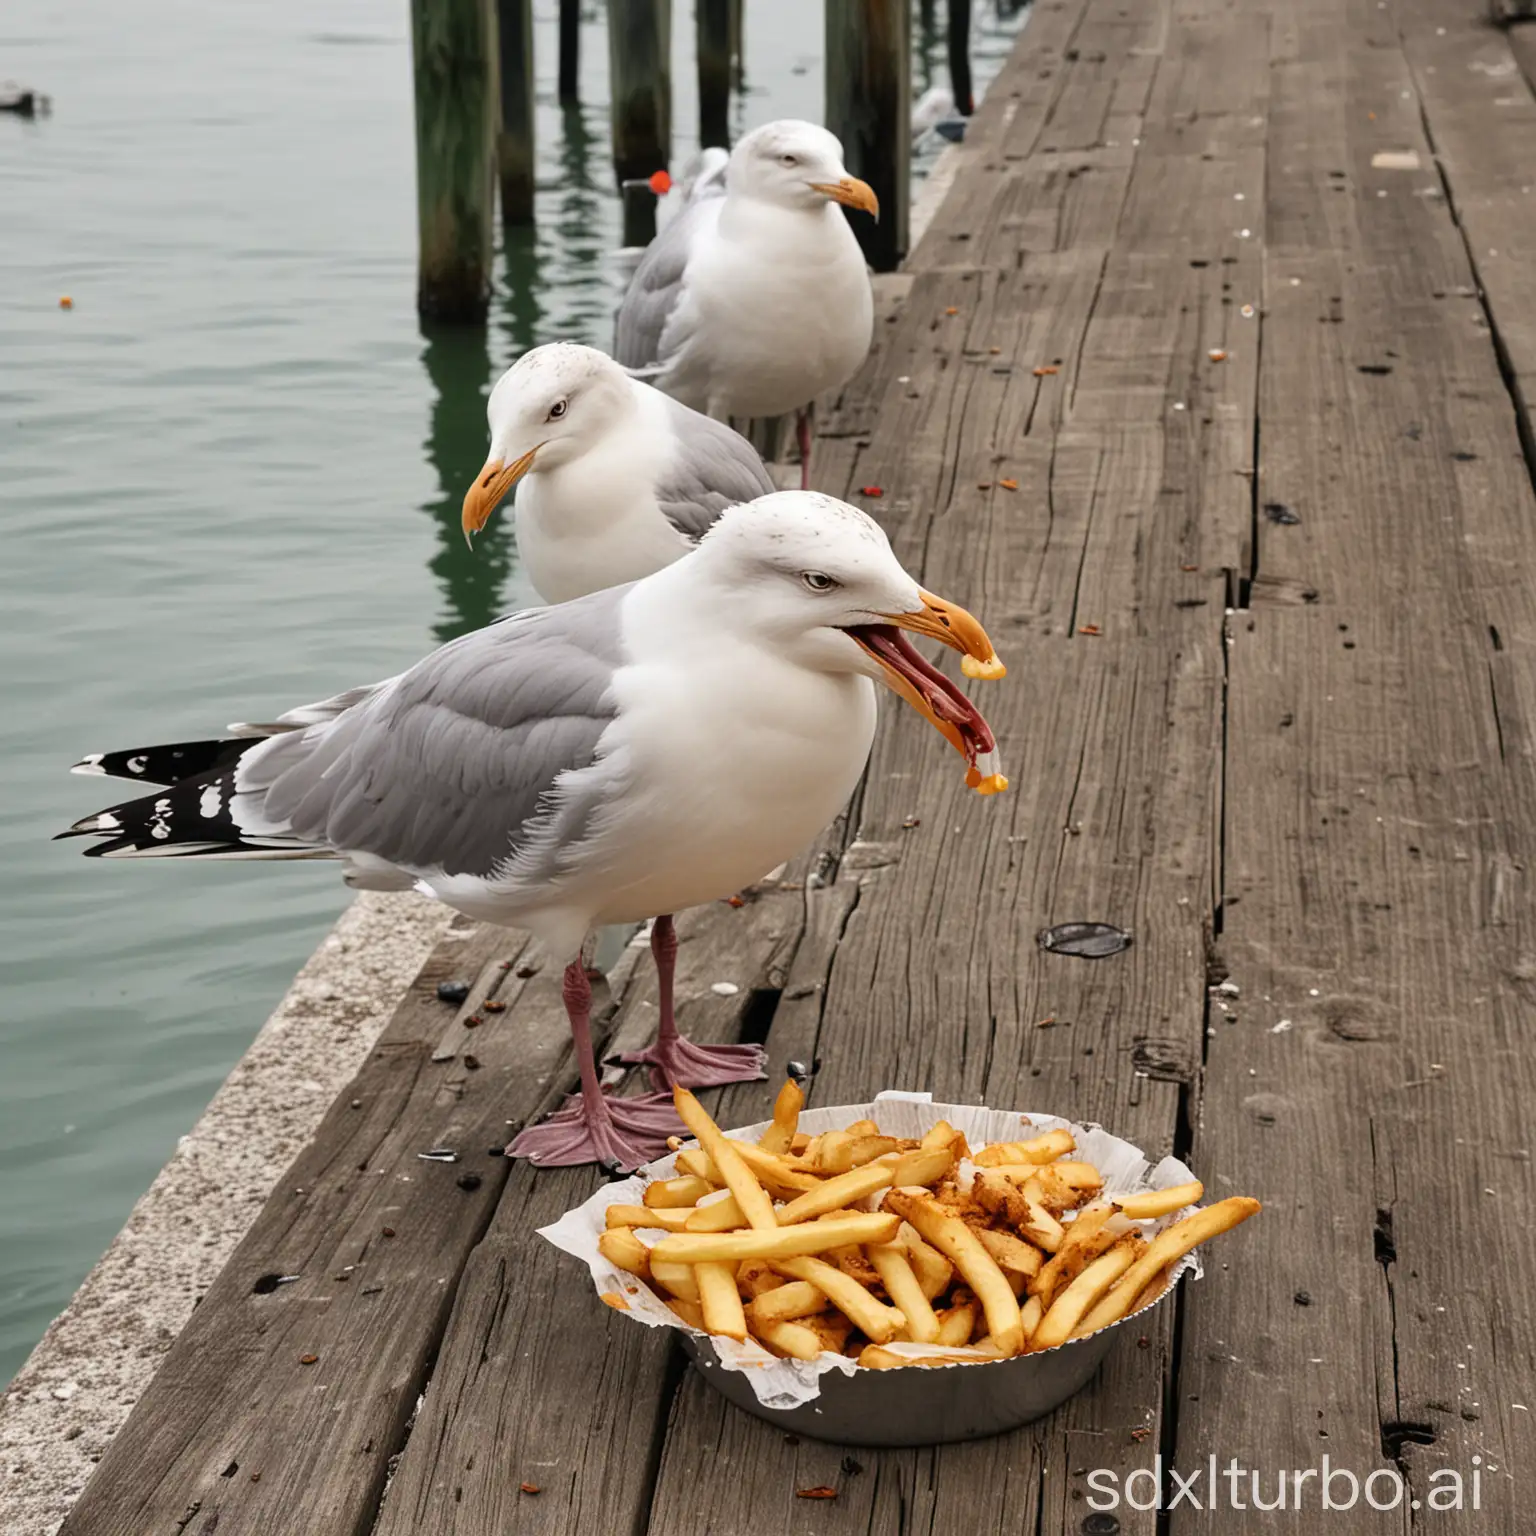 Seagulls are eating fries at the pier